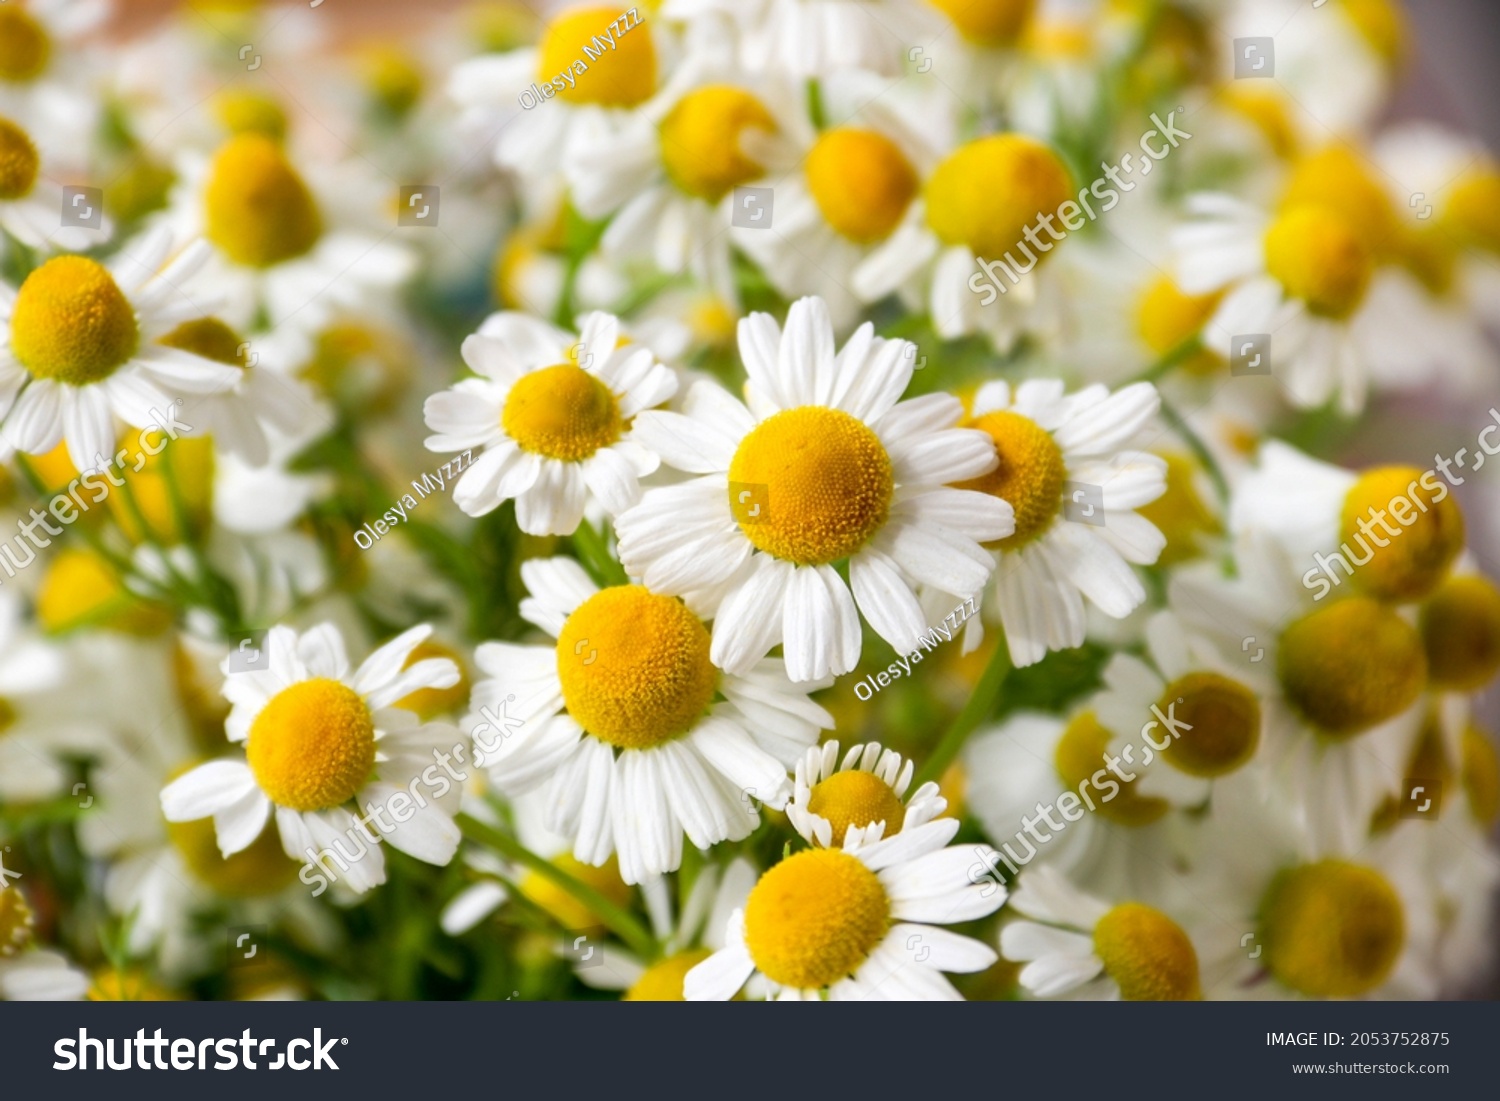 Chamomile flower field. Camomile in the nature. Field of camomiles at sunny day at nature. Camomile daisy flowers in summer day. Chamomile flowers field wide background in sun light #2053752875